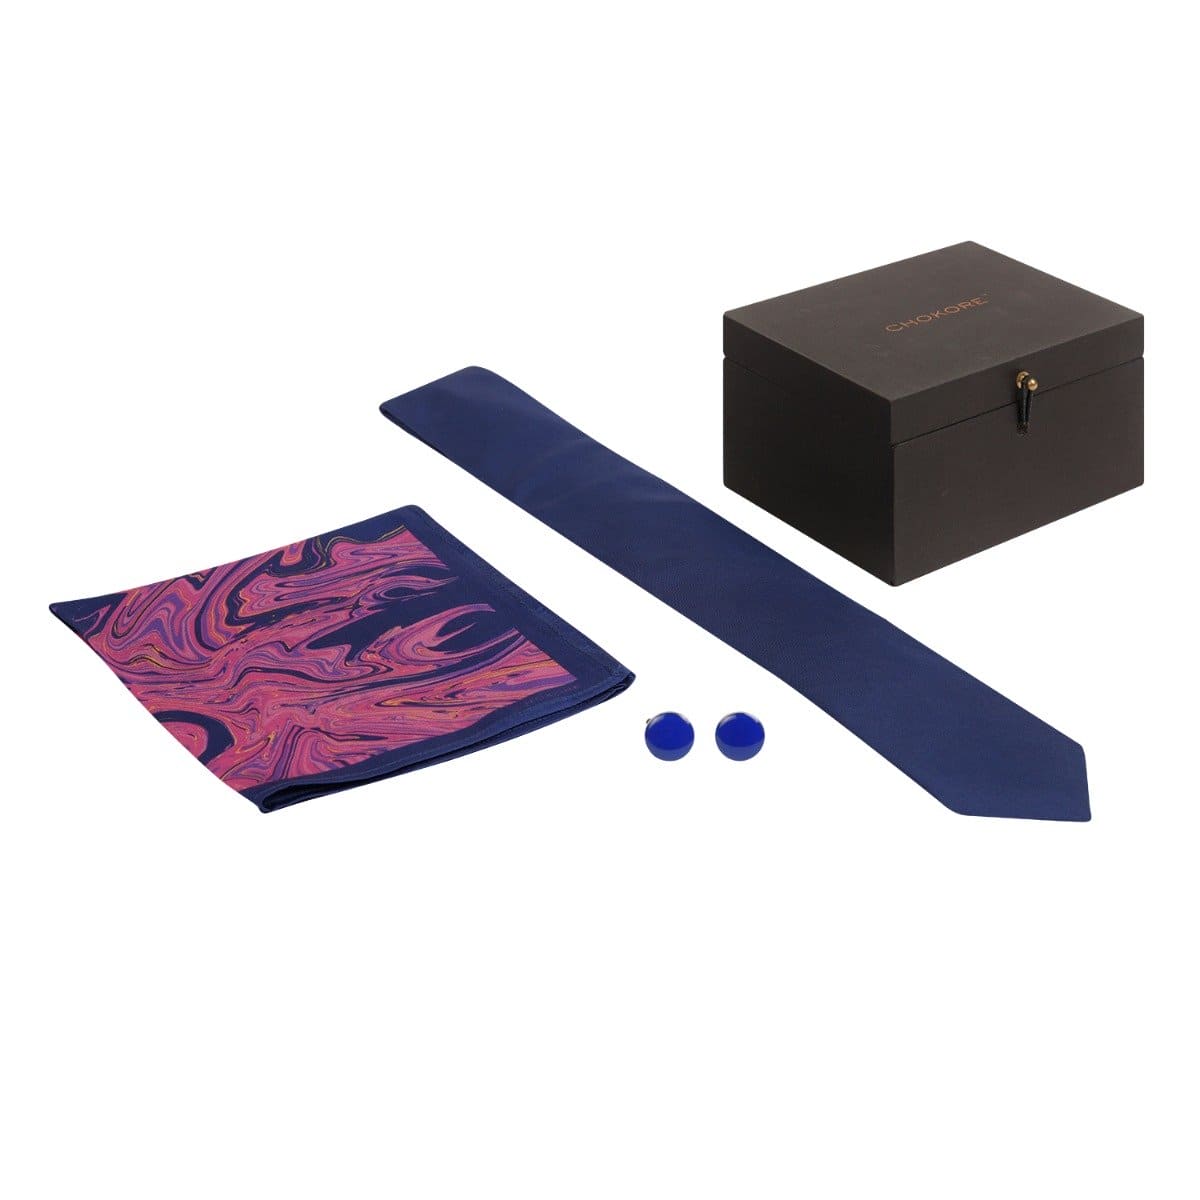 Chokore Navy Blue color 3-in-1 Gift set